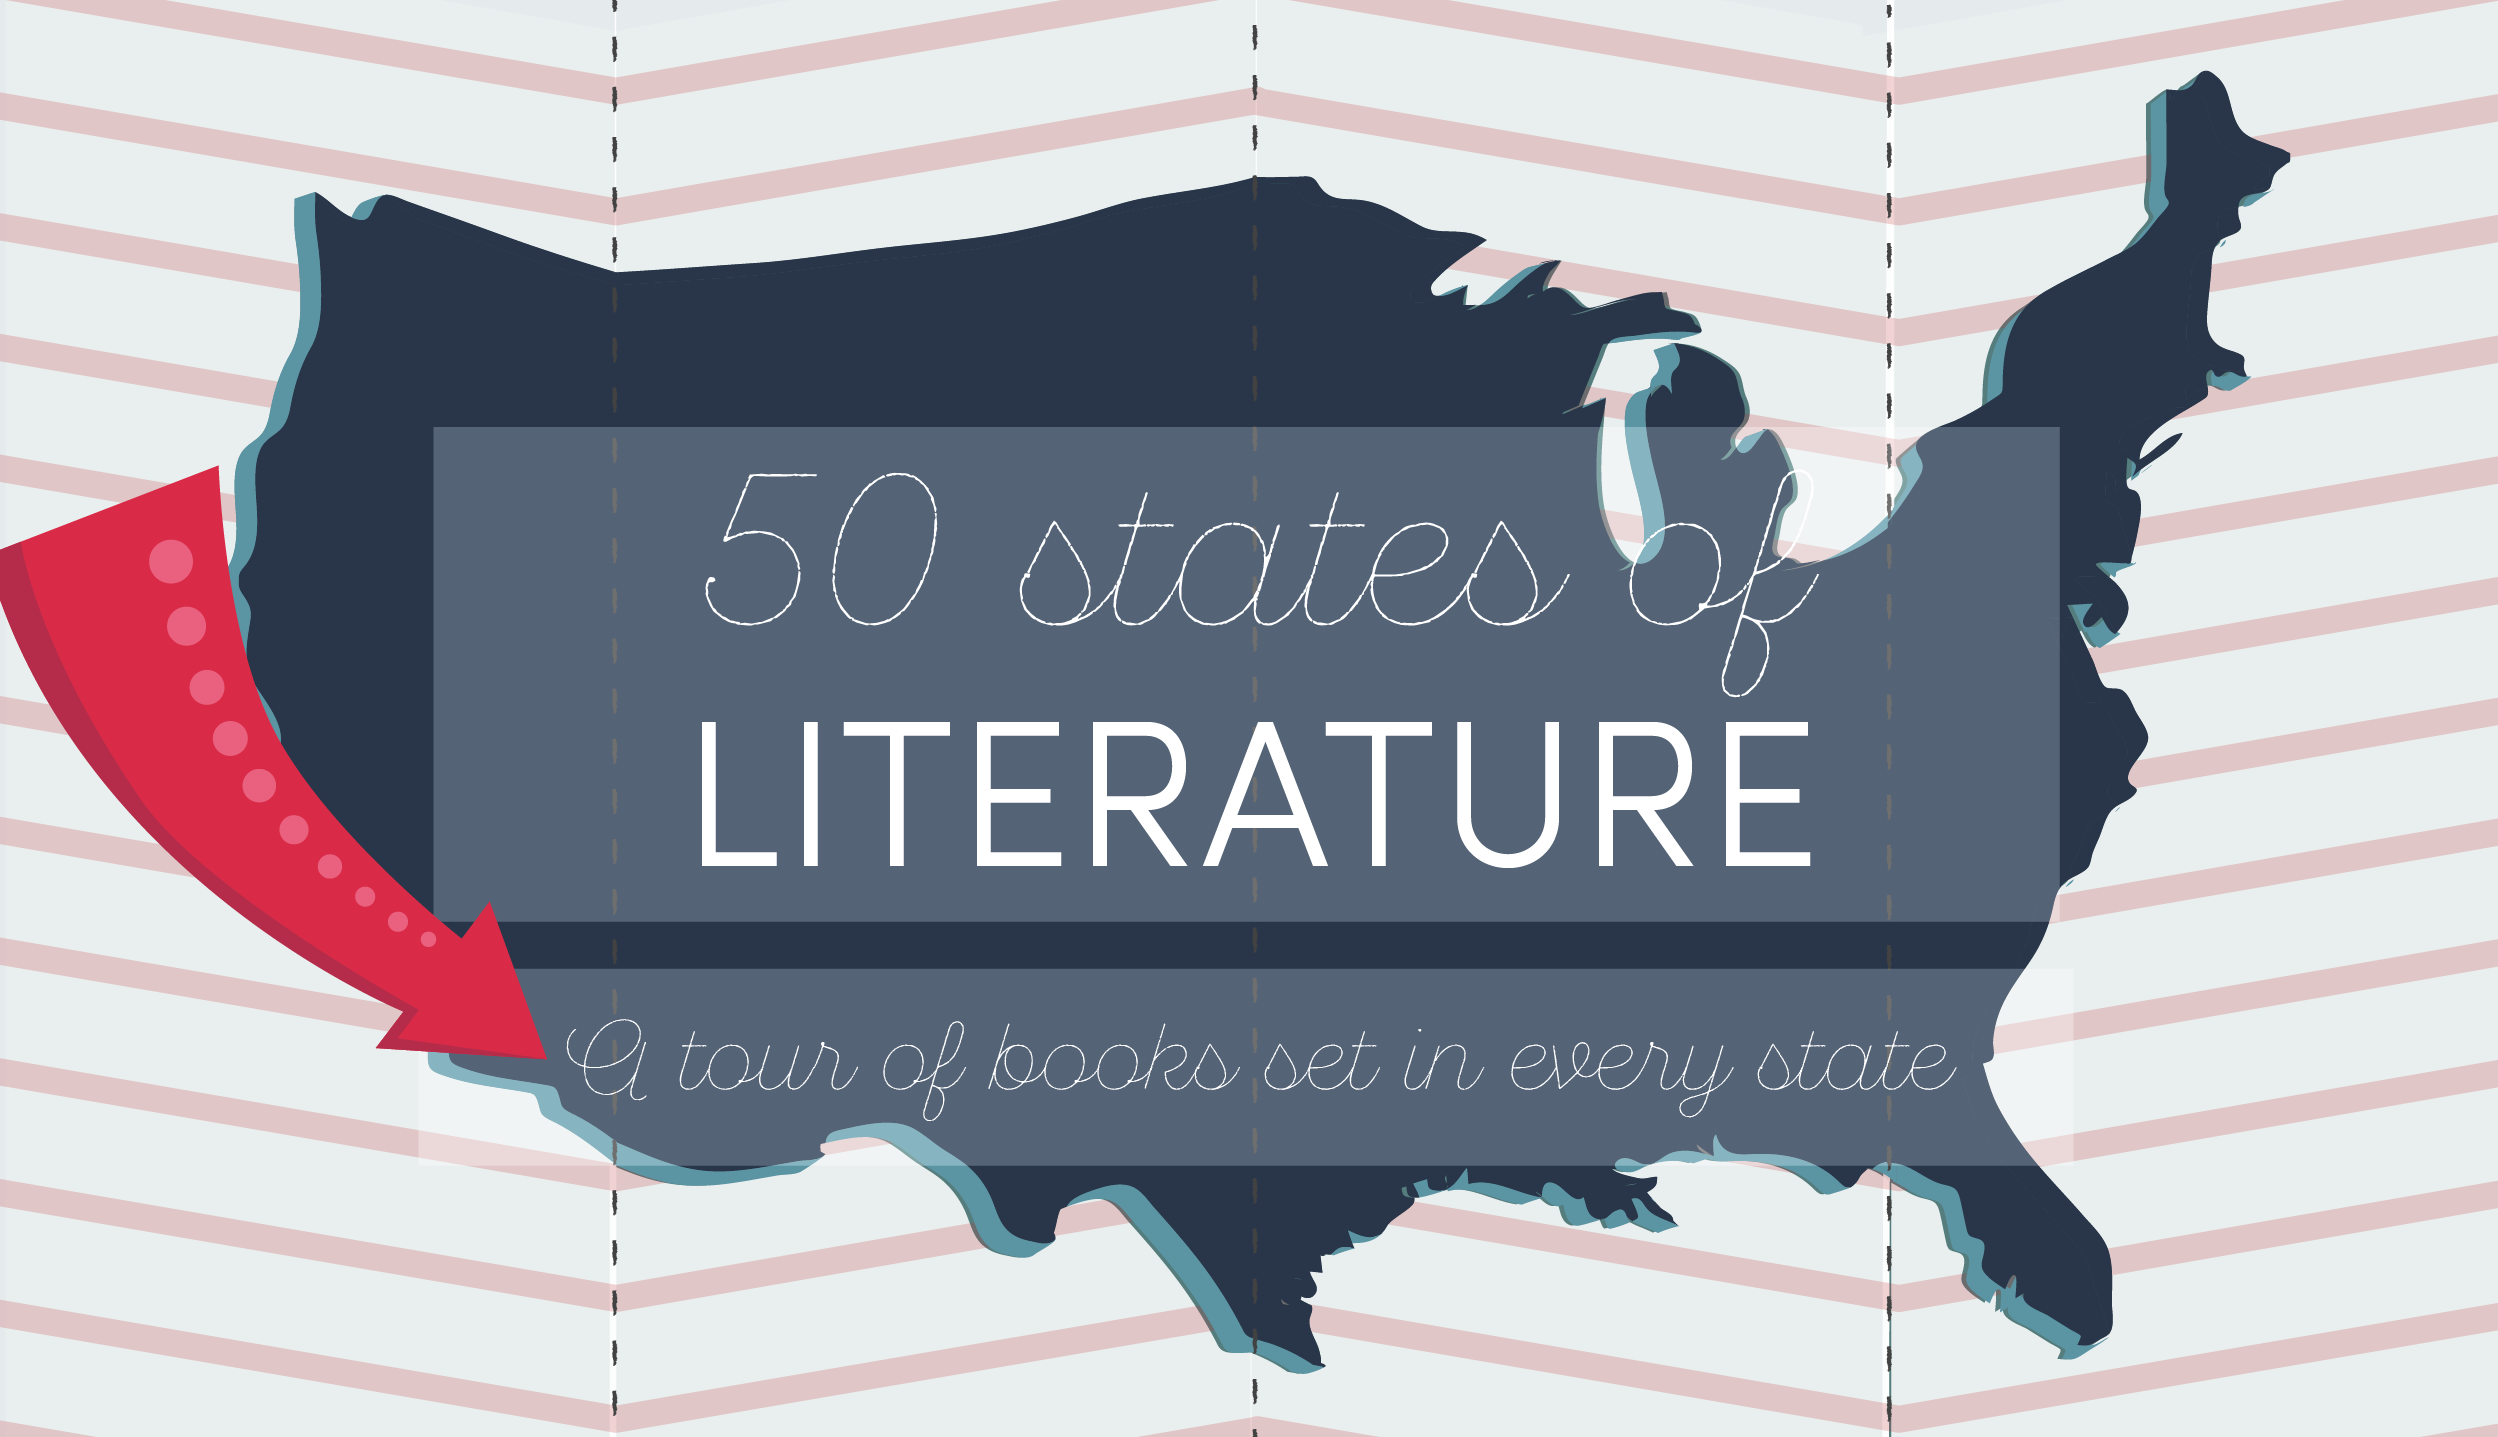 50 States of Literature featured banner